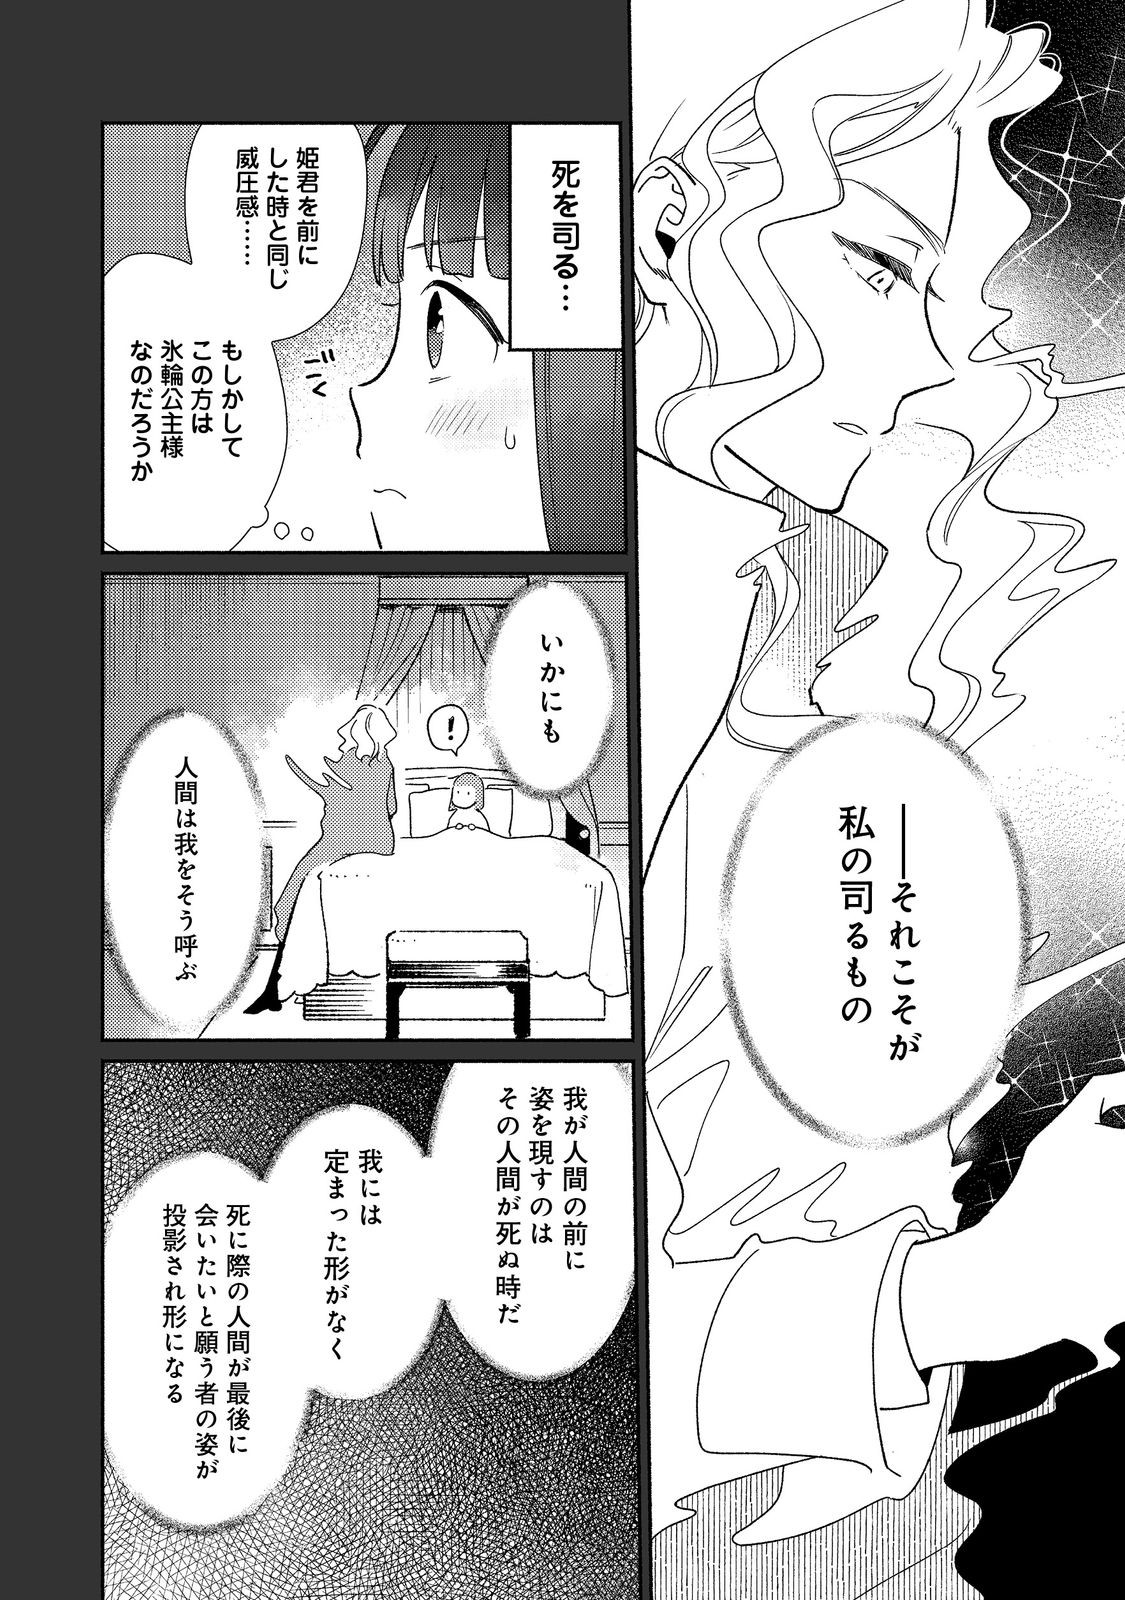 I’m the White Pig Nobleman 第22.1話 - Page 6